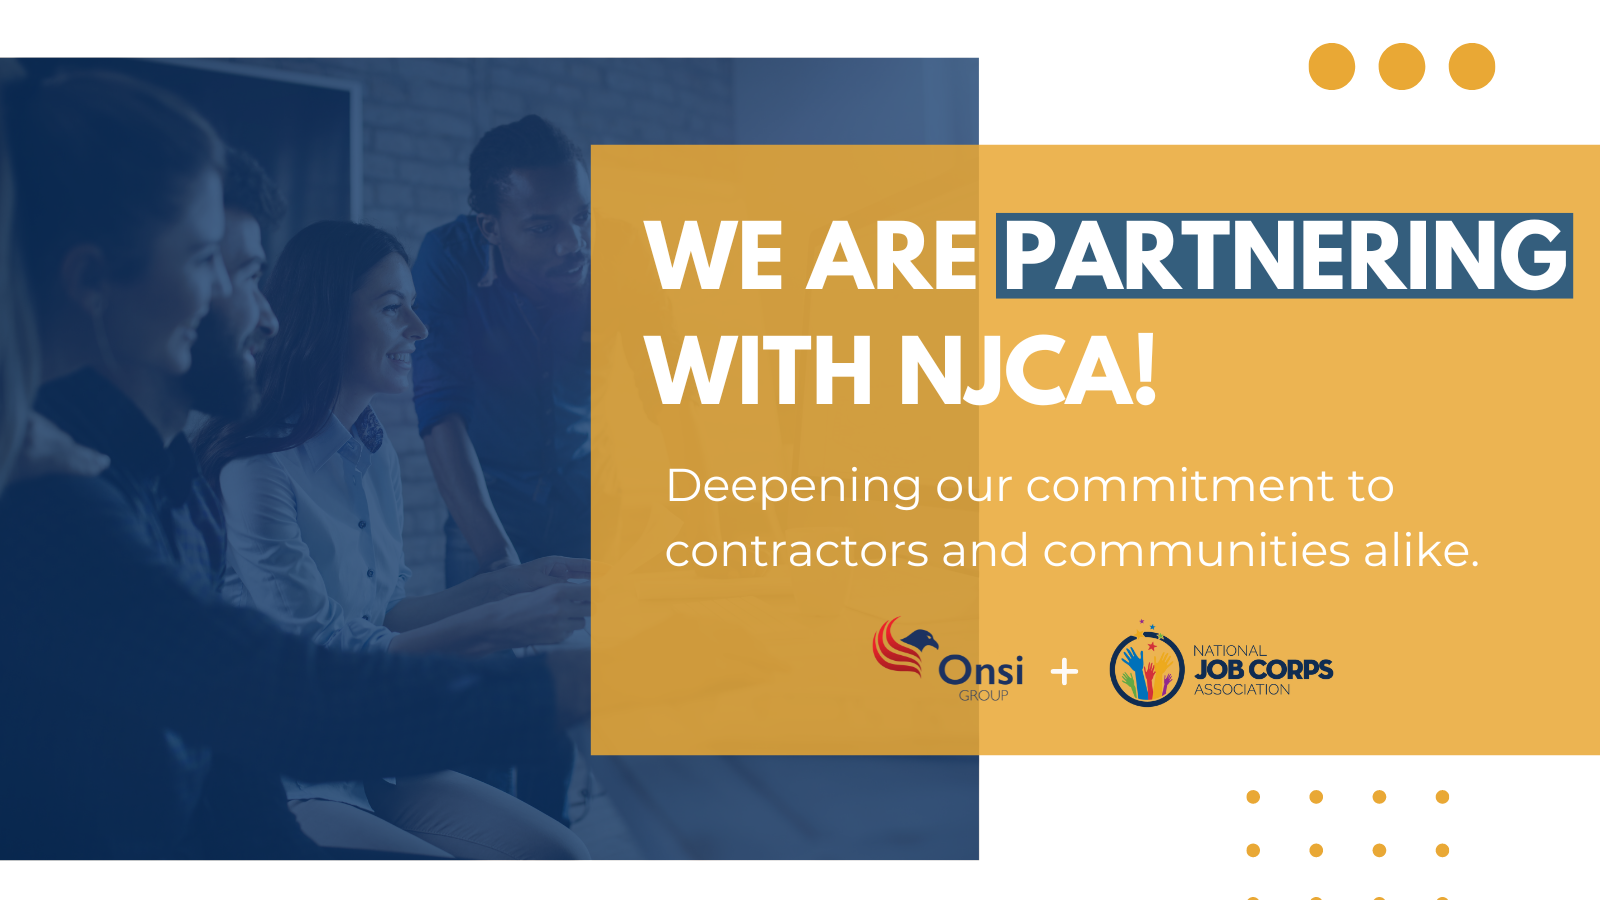 The Onsi Group Joins Forces with the National Job Corps Association